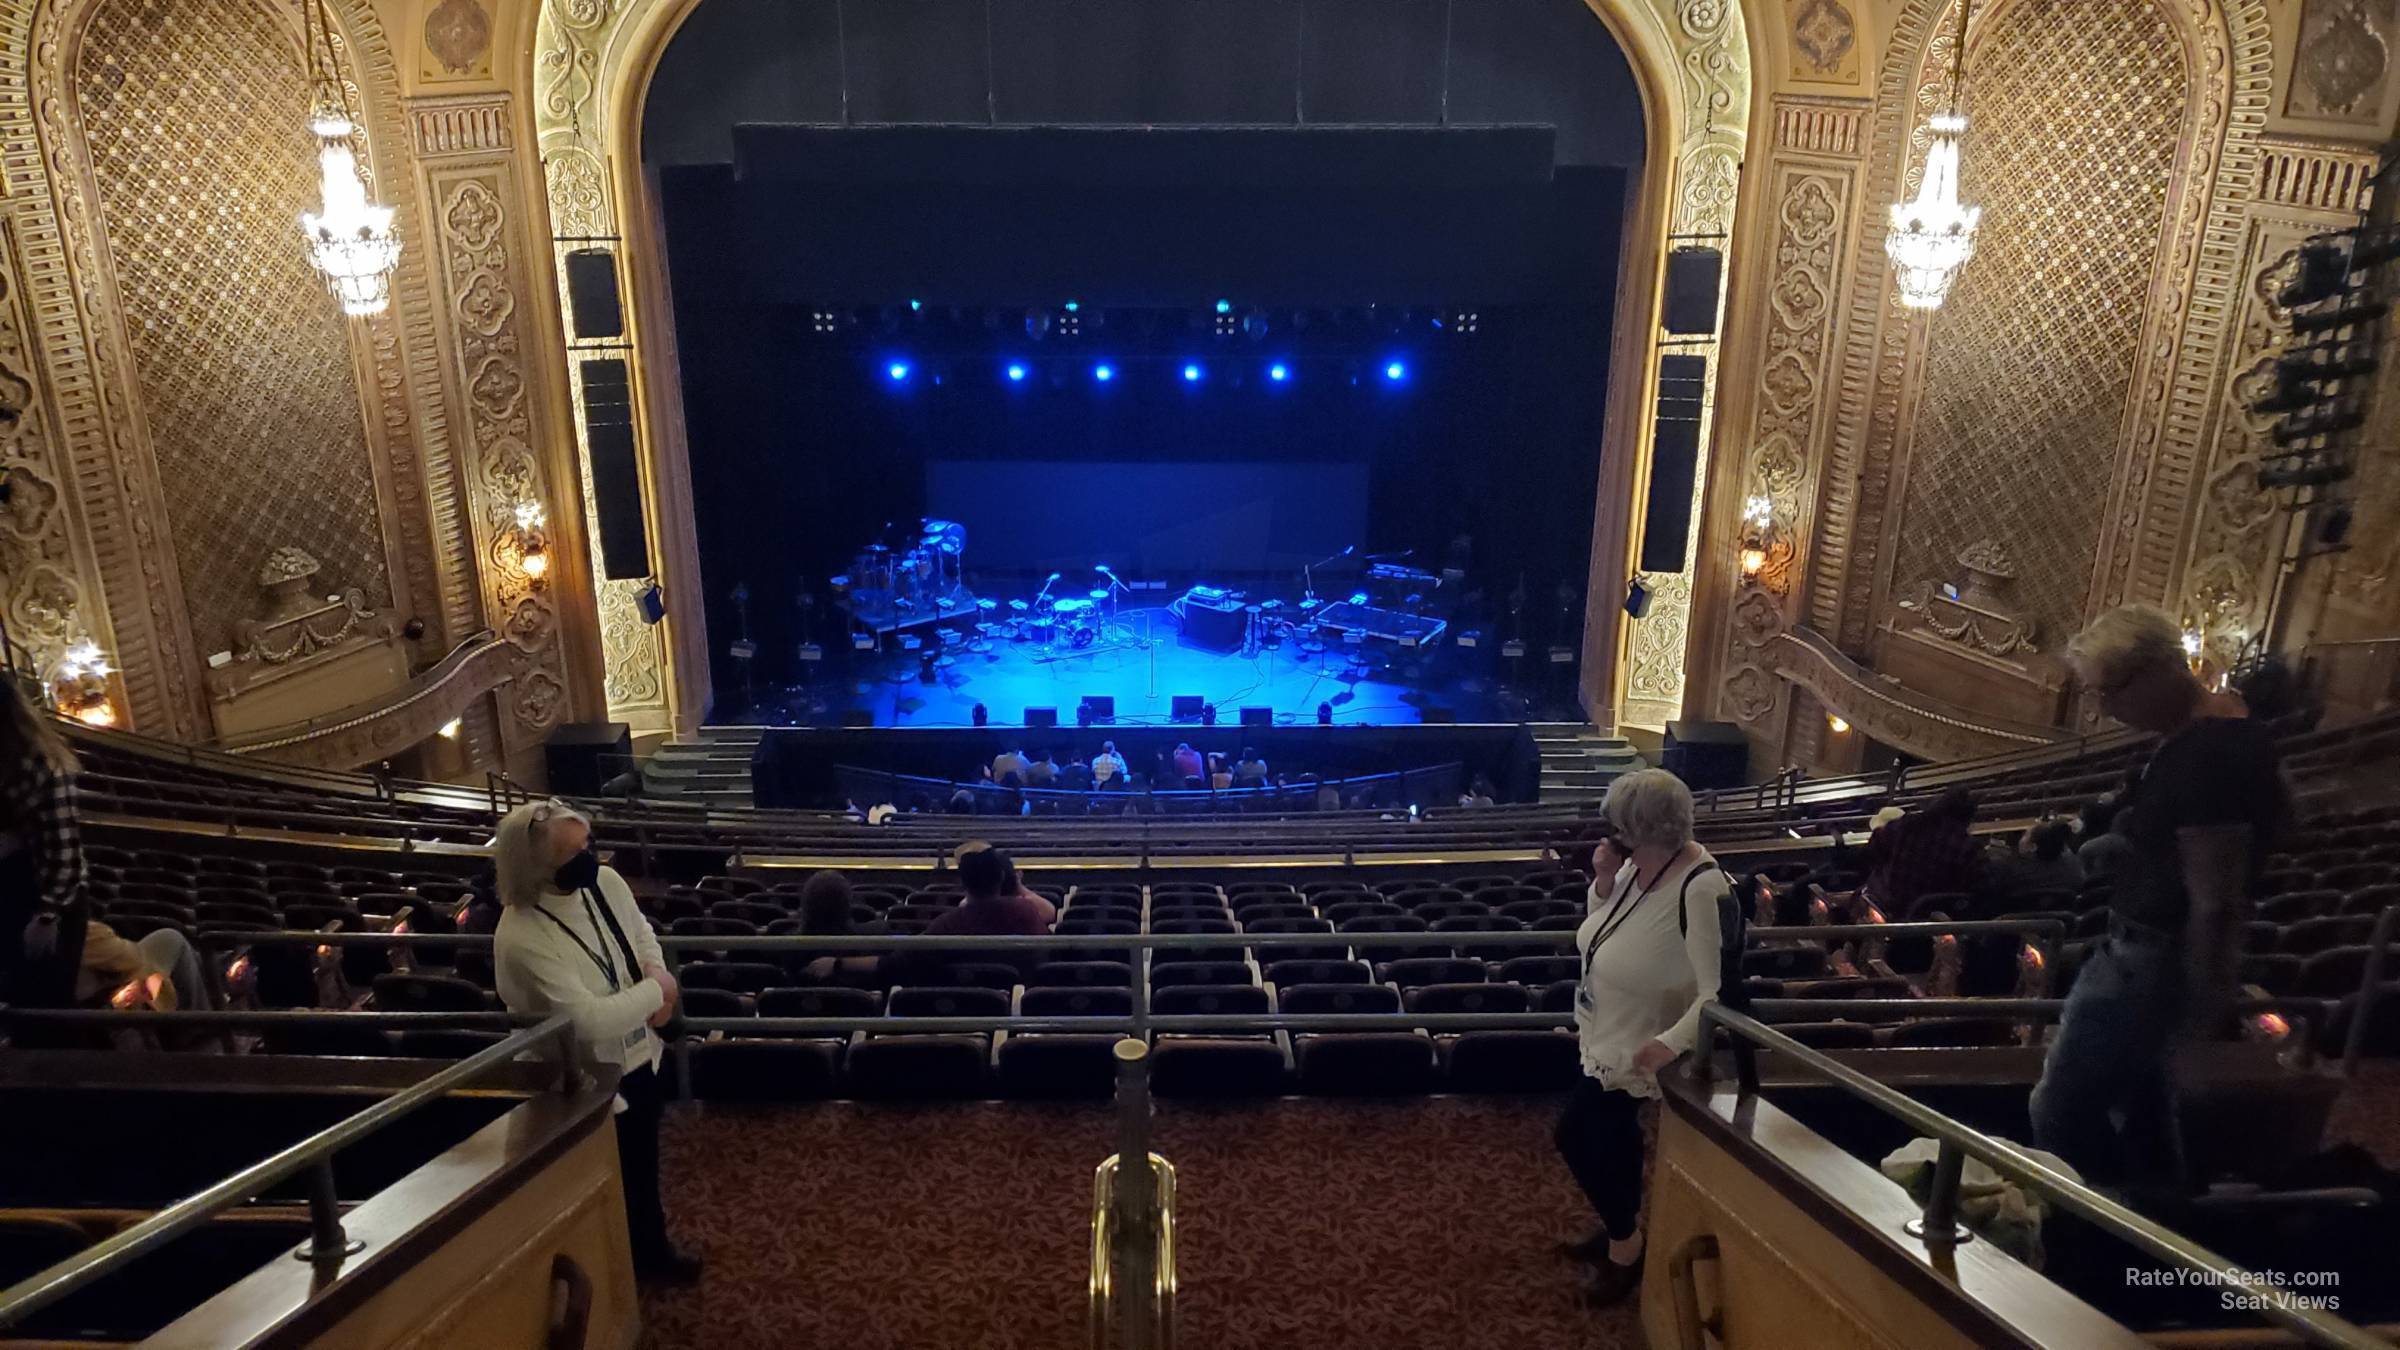 section 23, row o seat view  - paramount theatre - seattle